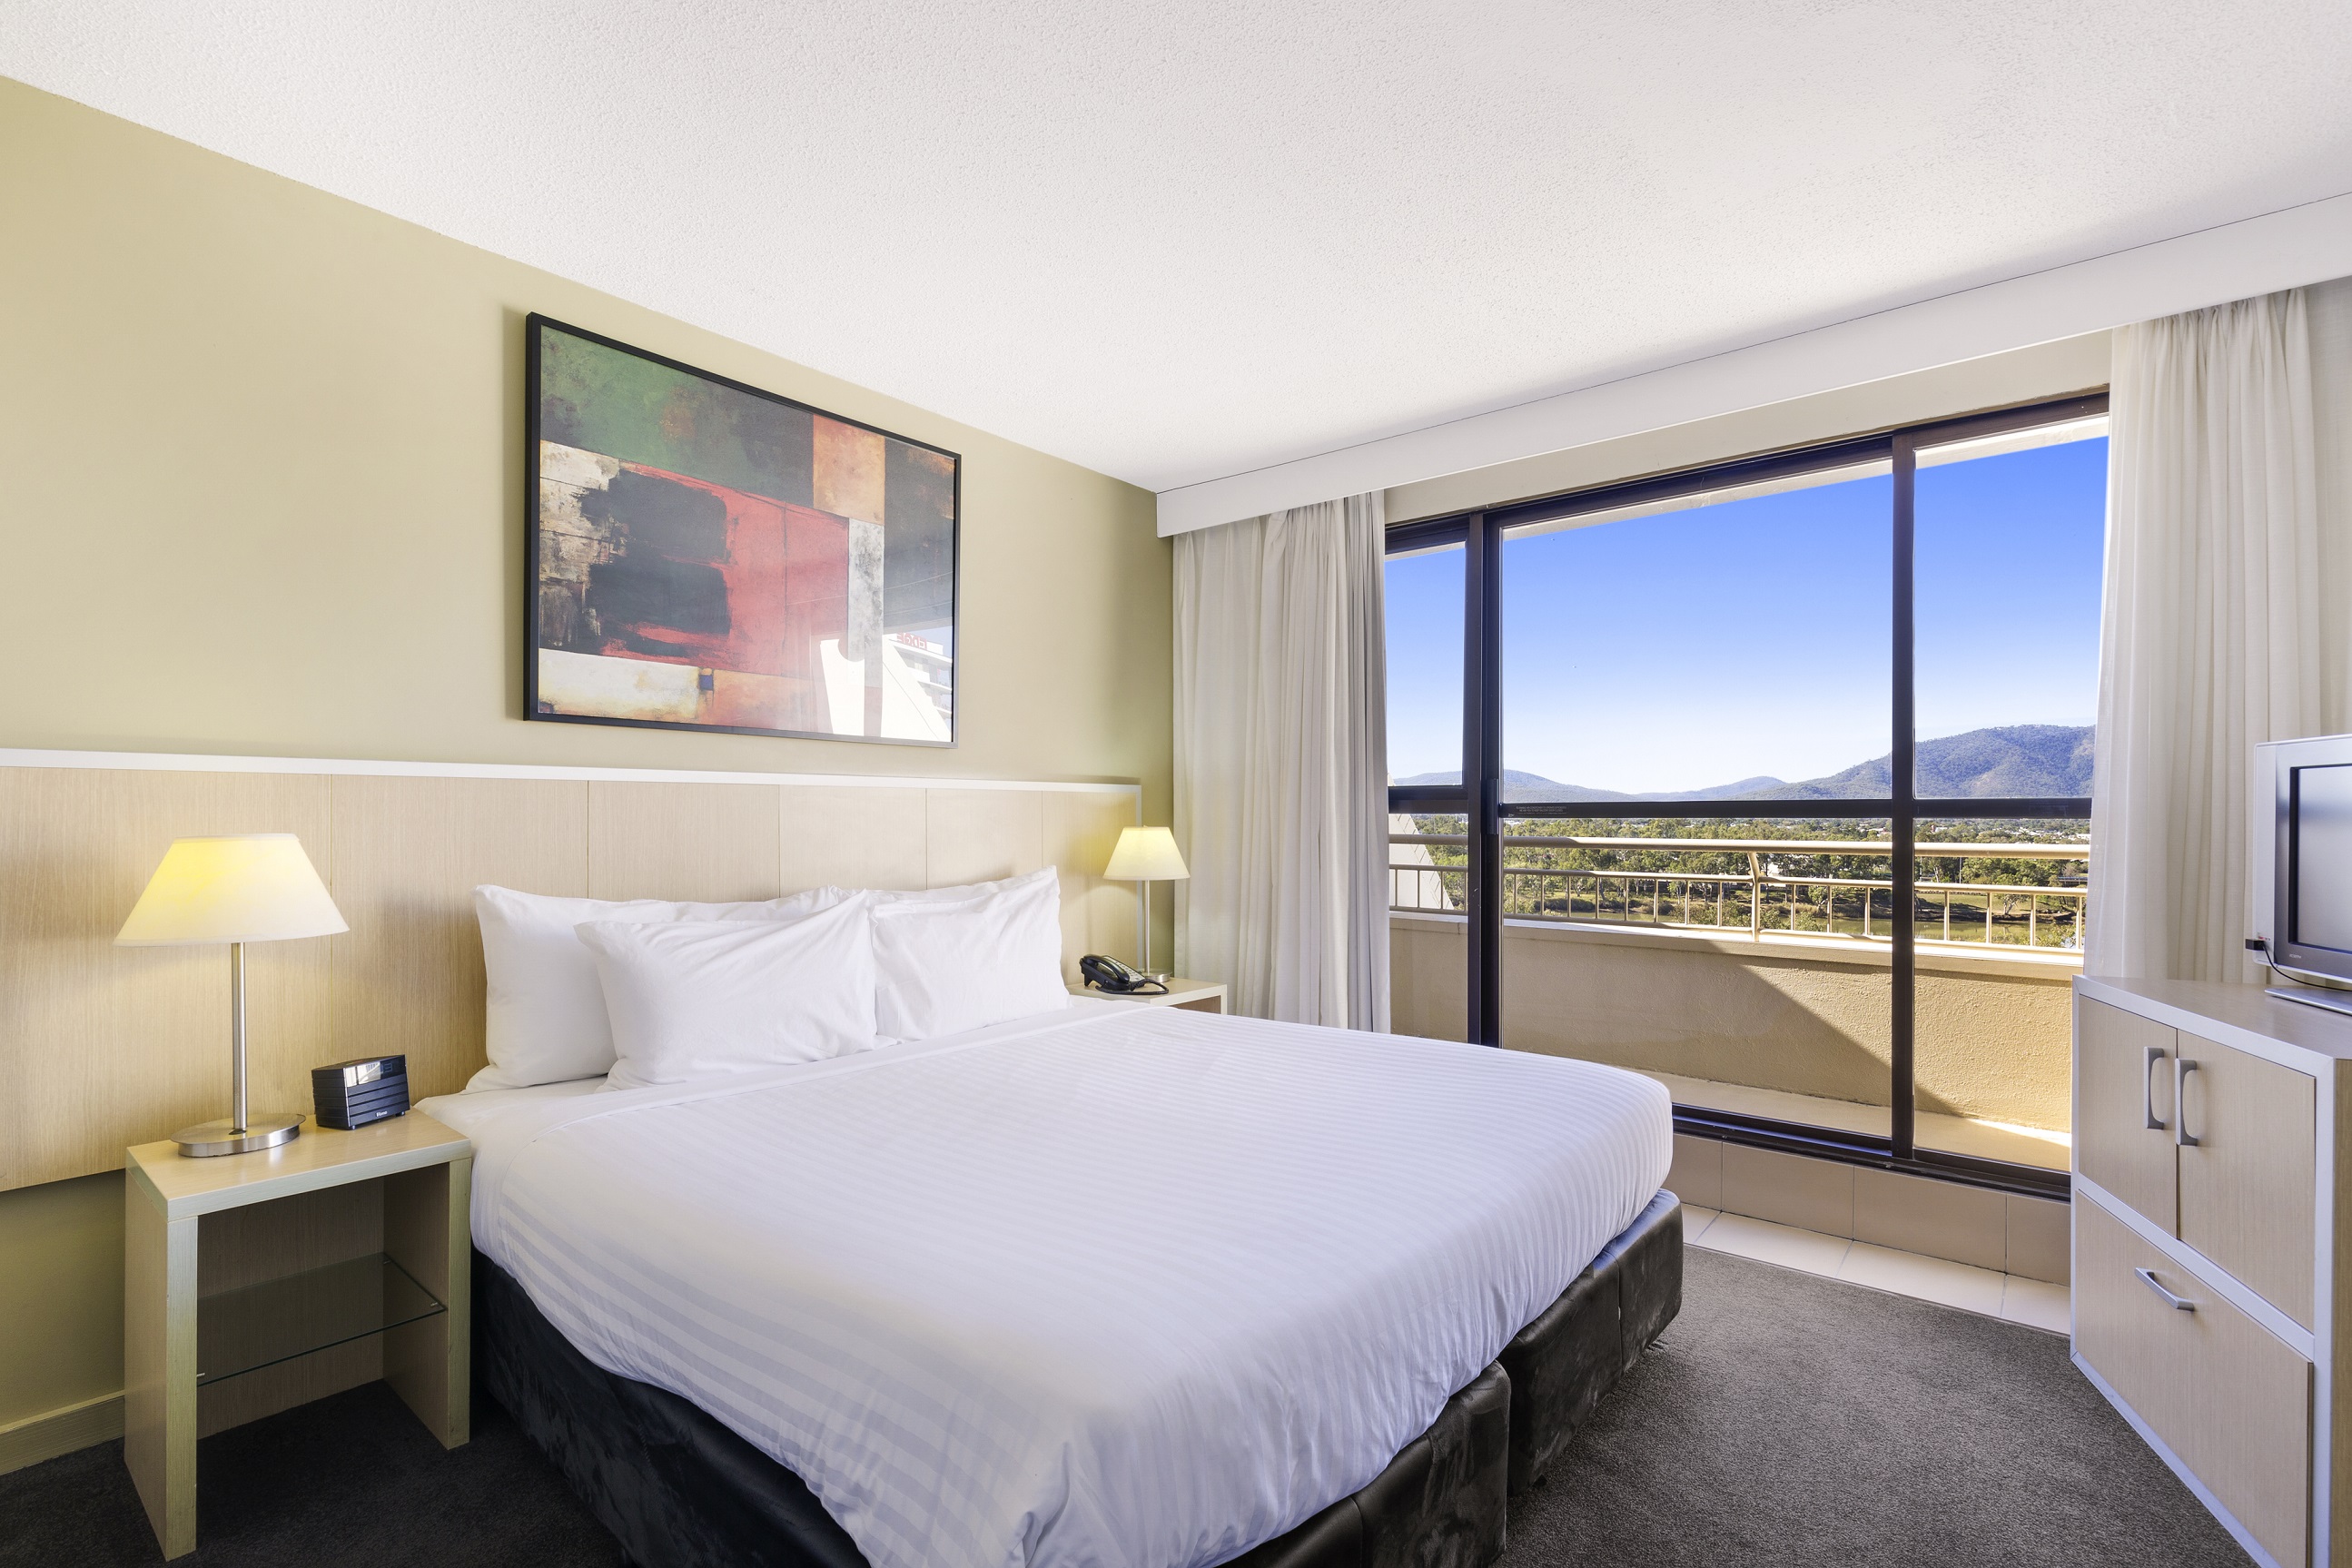 Accor has rebranded the Travelodge Hotel Rockhampton as the Mercure Rockhampton, under a franchise agreement. Refurbished in 2008, Mercure Rockhampton is located in the heart of the city, just a short drive from the Rockhampton Airport. Click to enlarge.